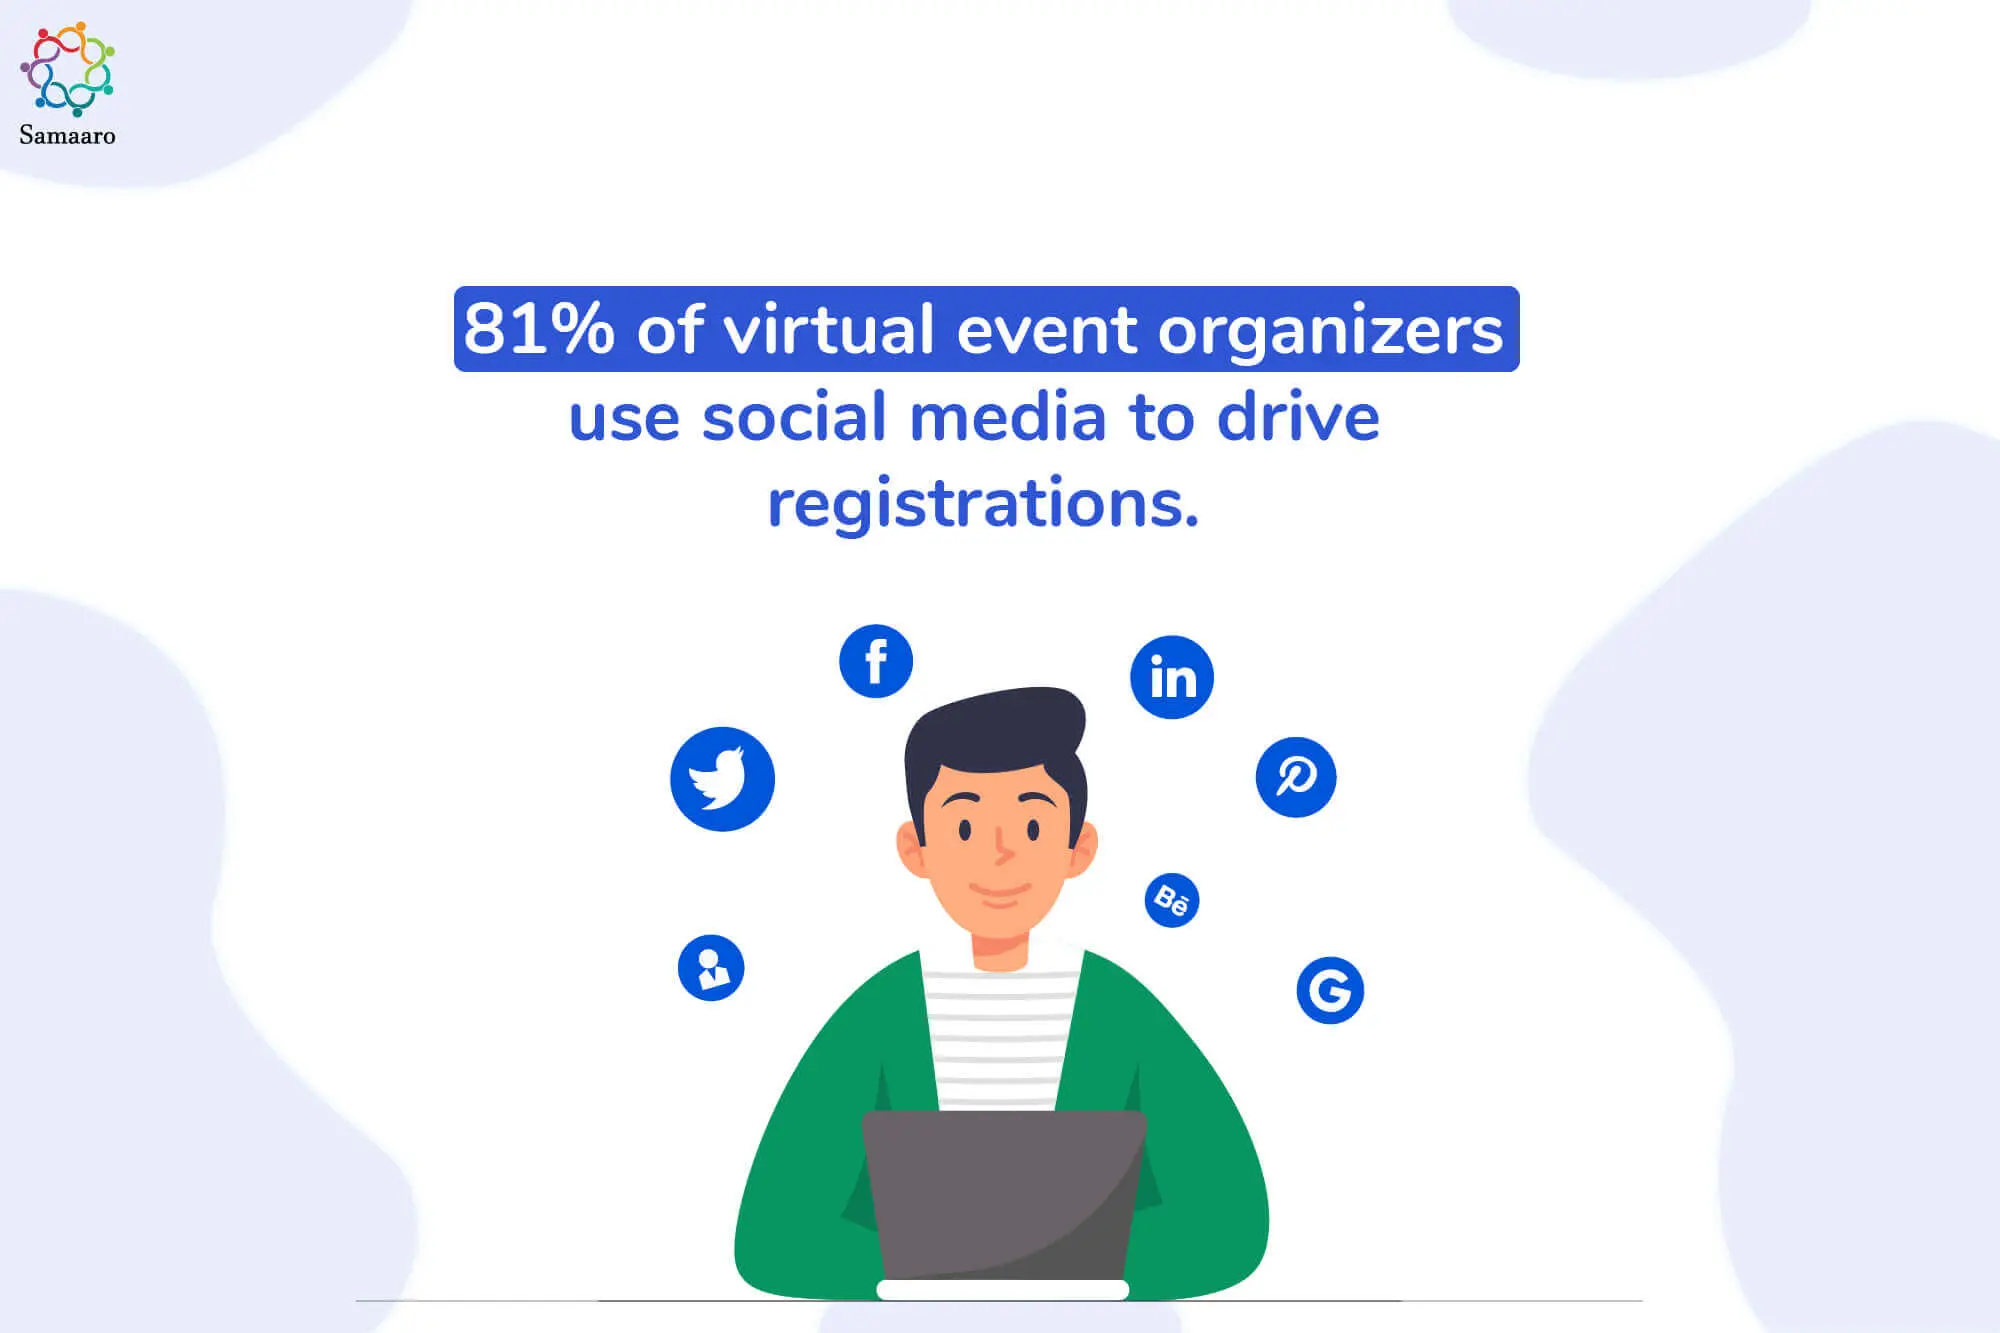 81% organizers use social media to drive registrations.